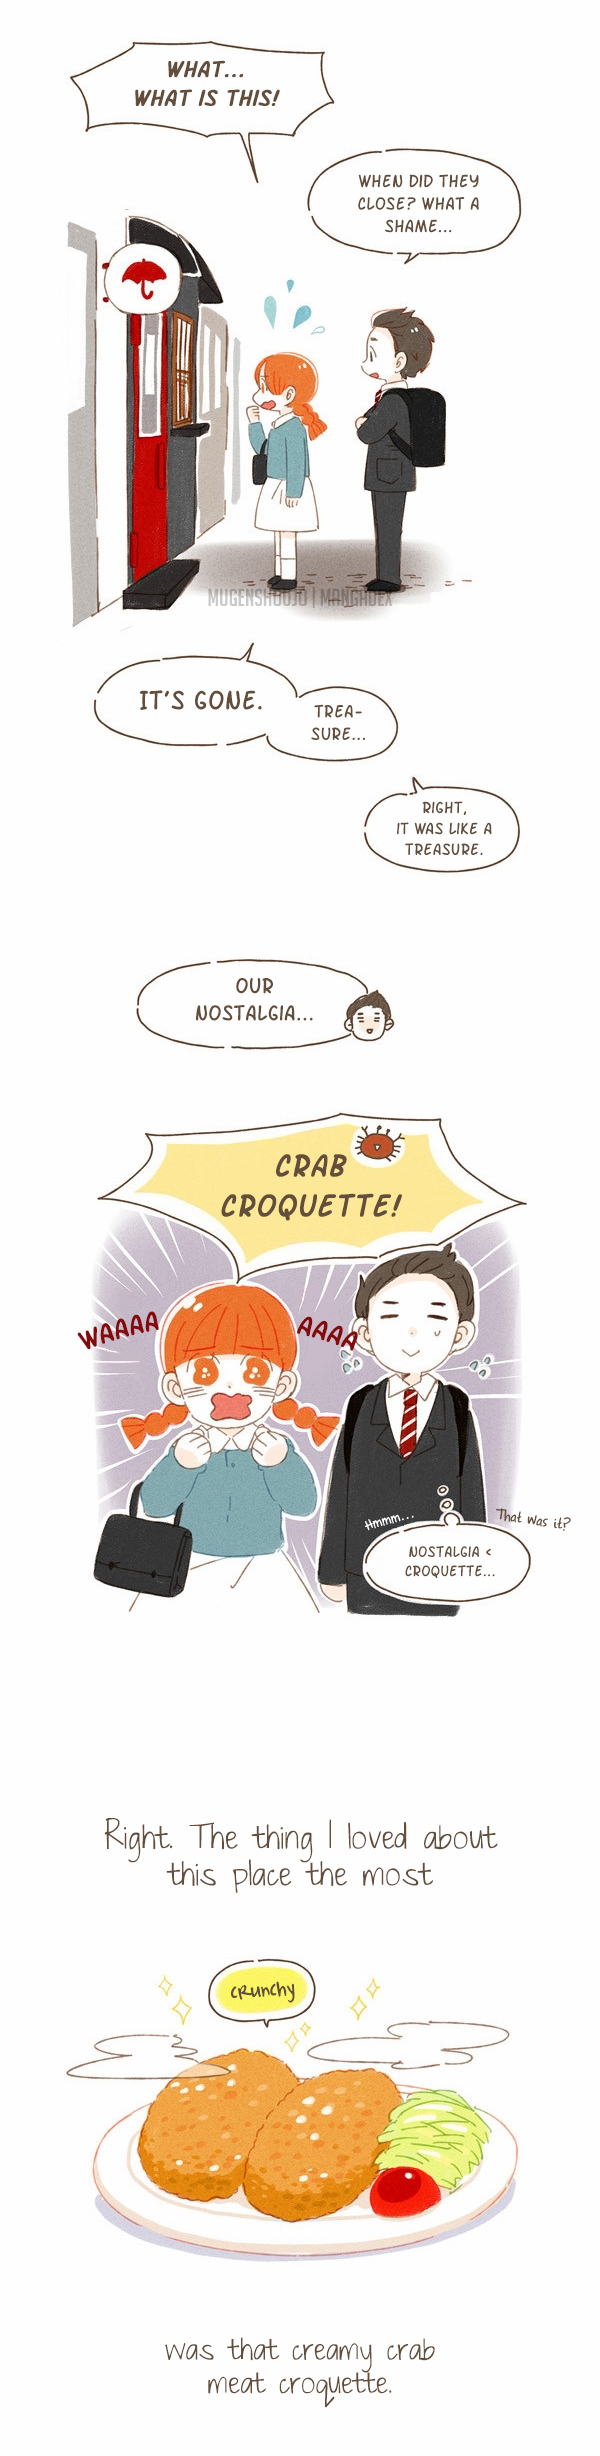 Are You Going to Eat? Ch. 5 Croquette